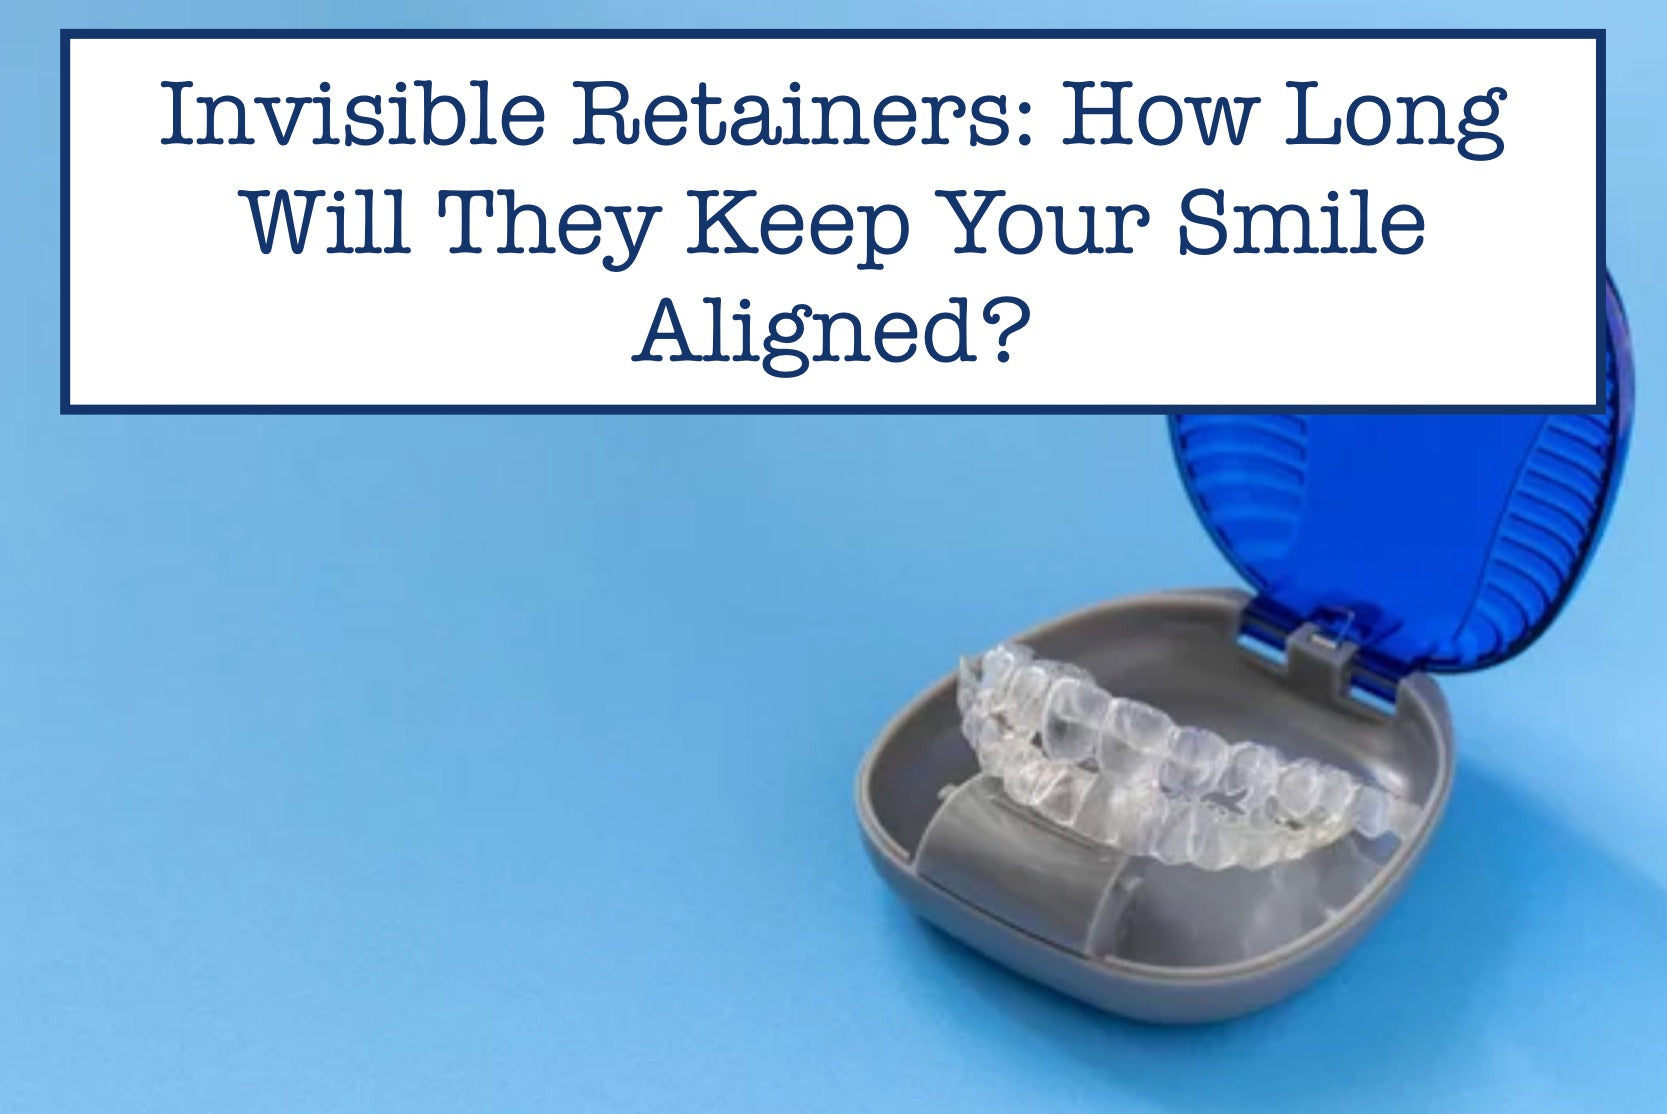 Invisible Retainers: How Long Will They Keep Your Smile Aligned?